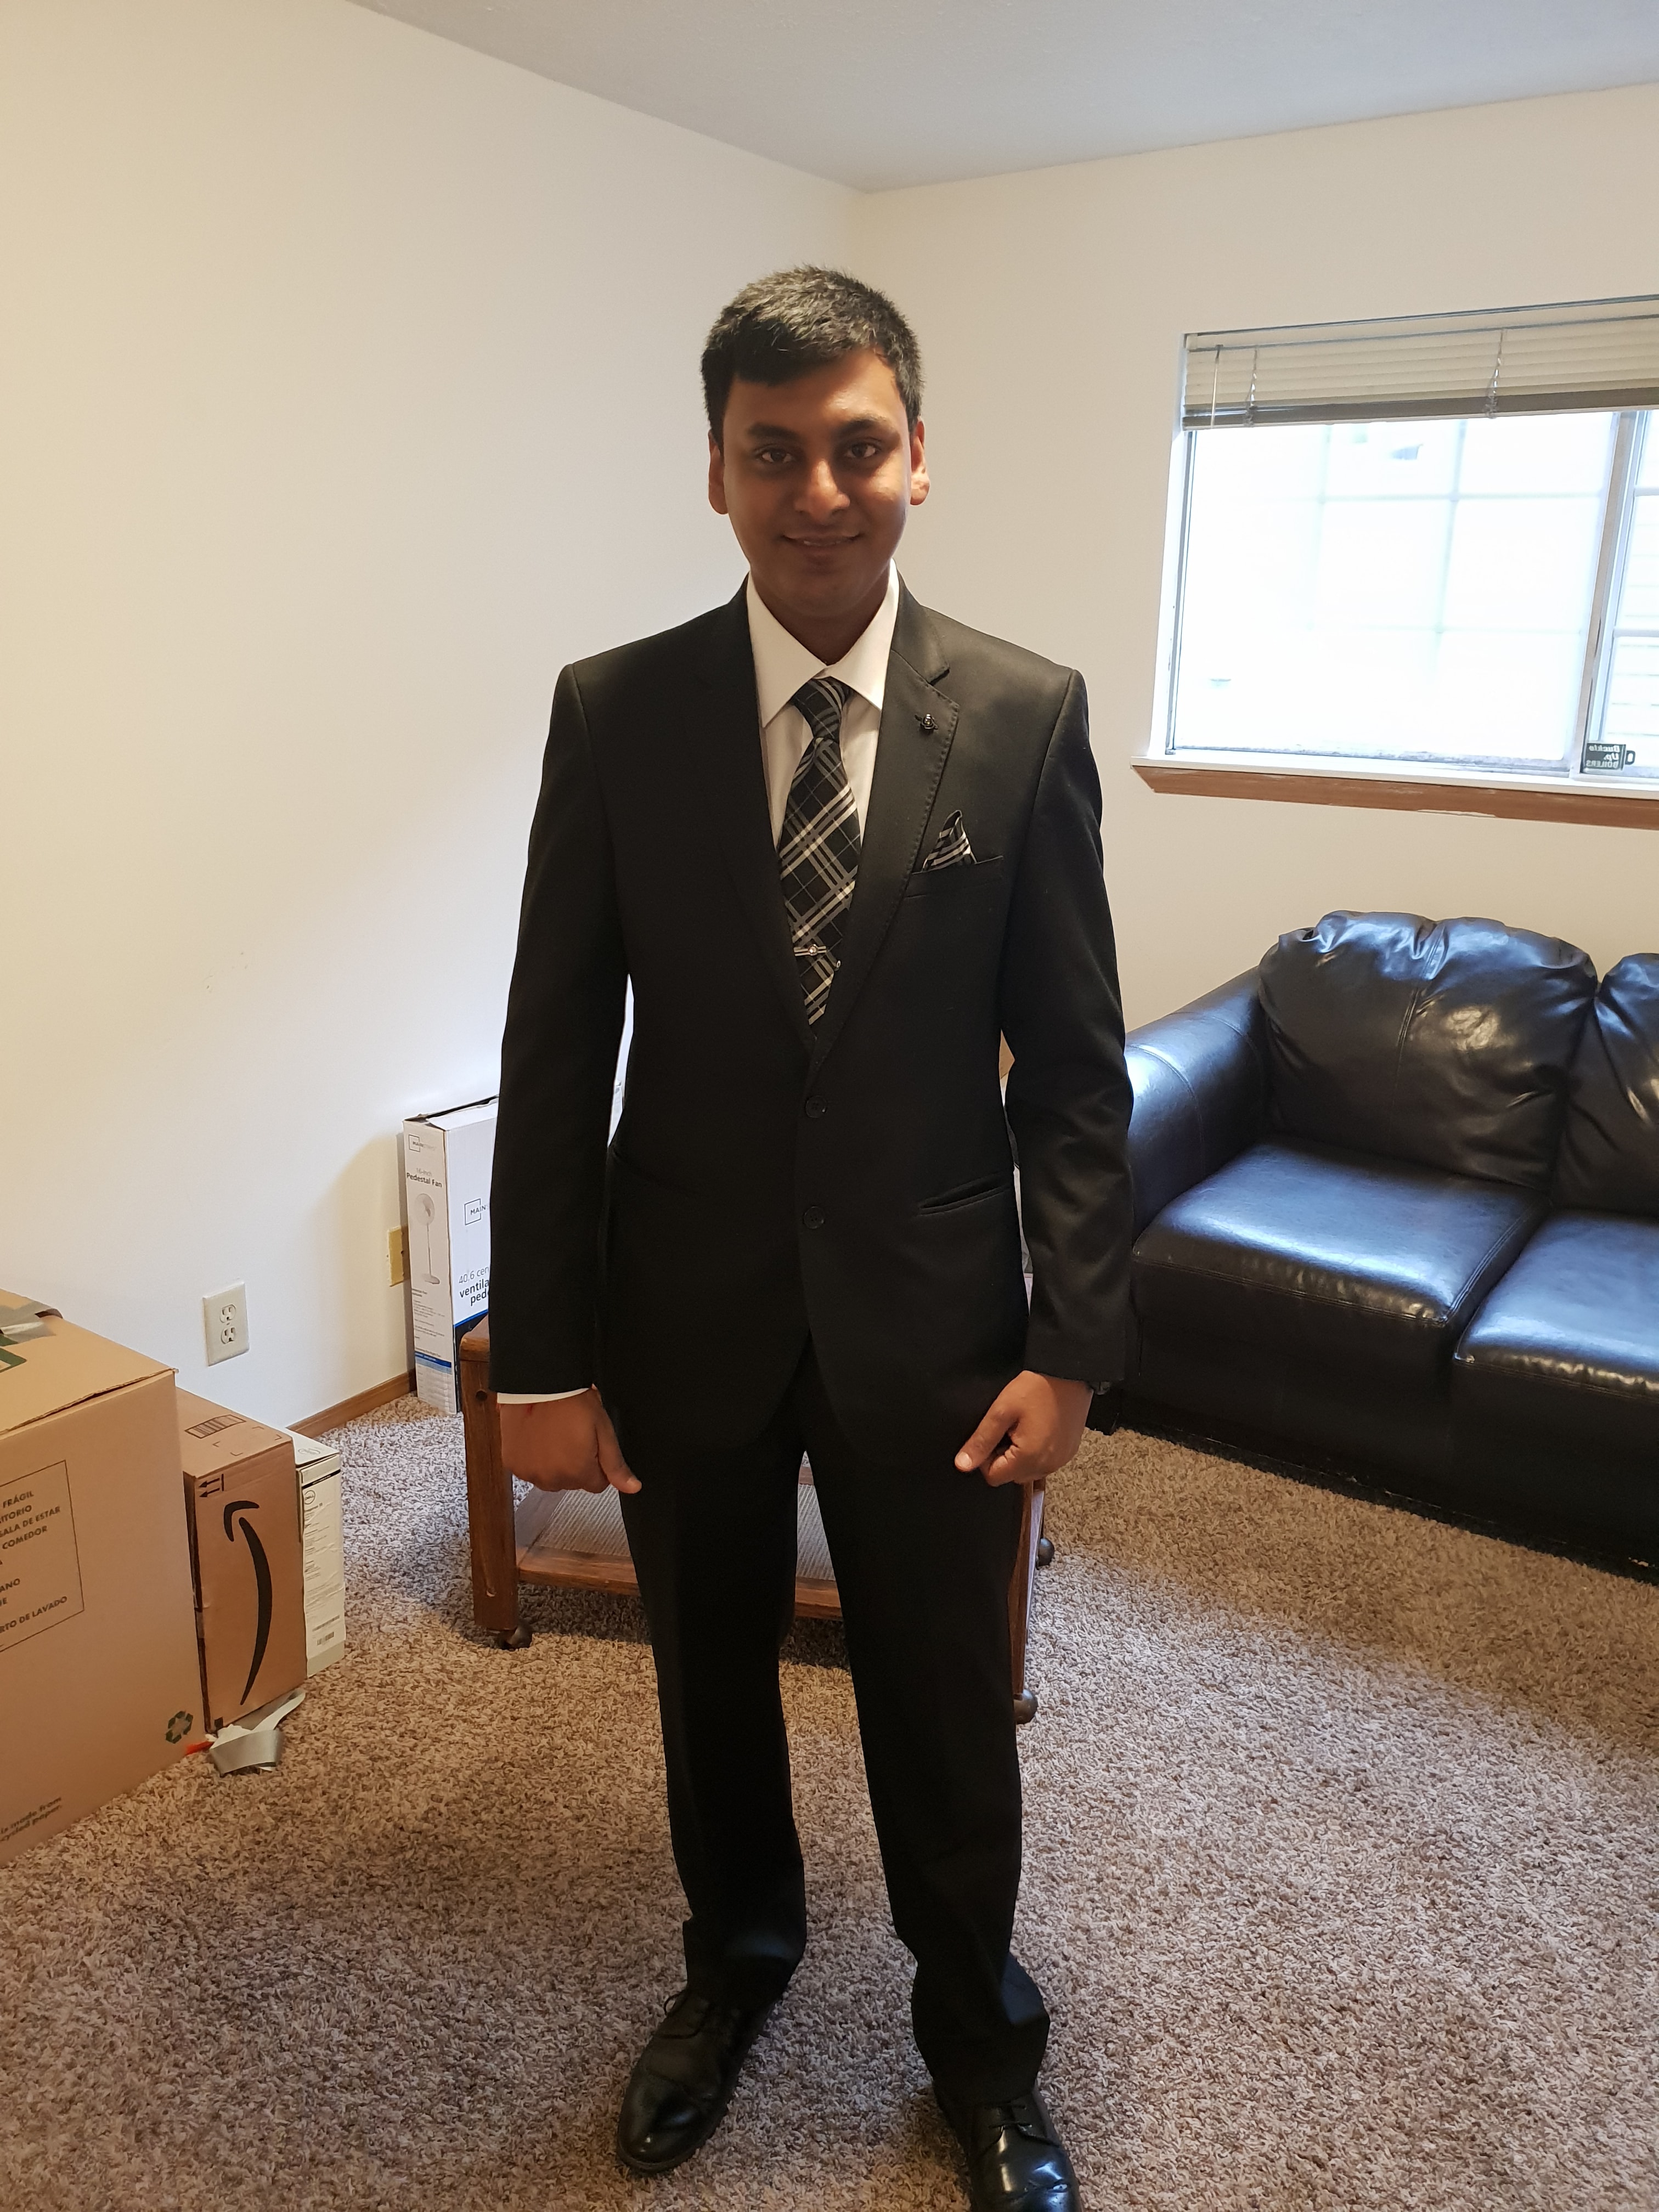 Myself in Business Professional Attires